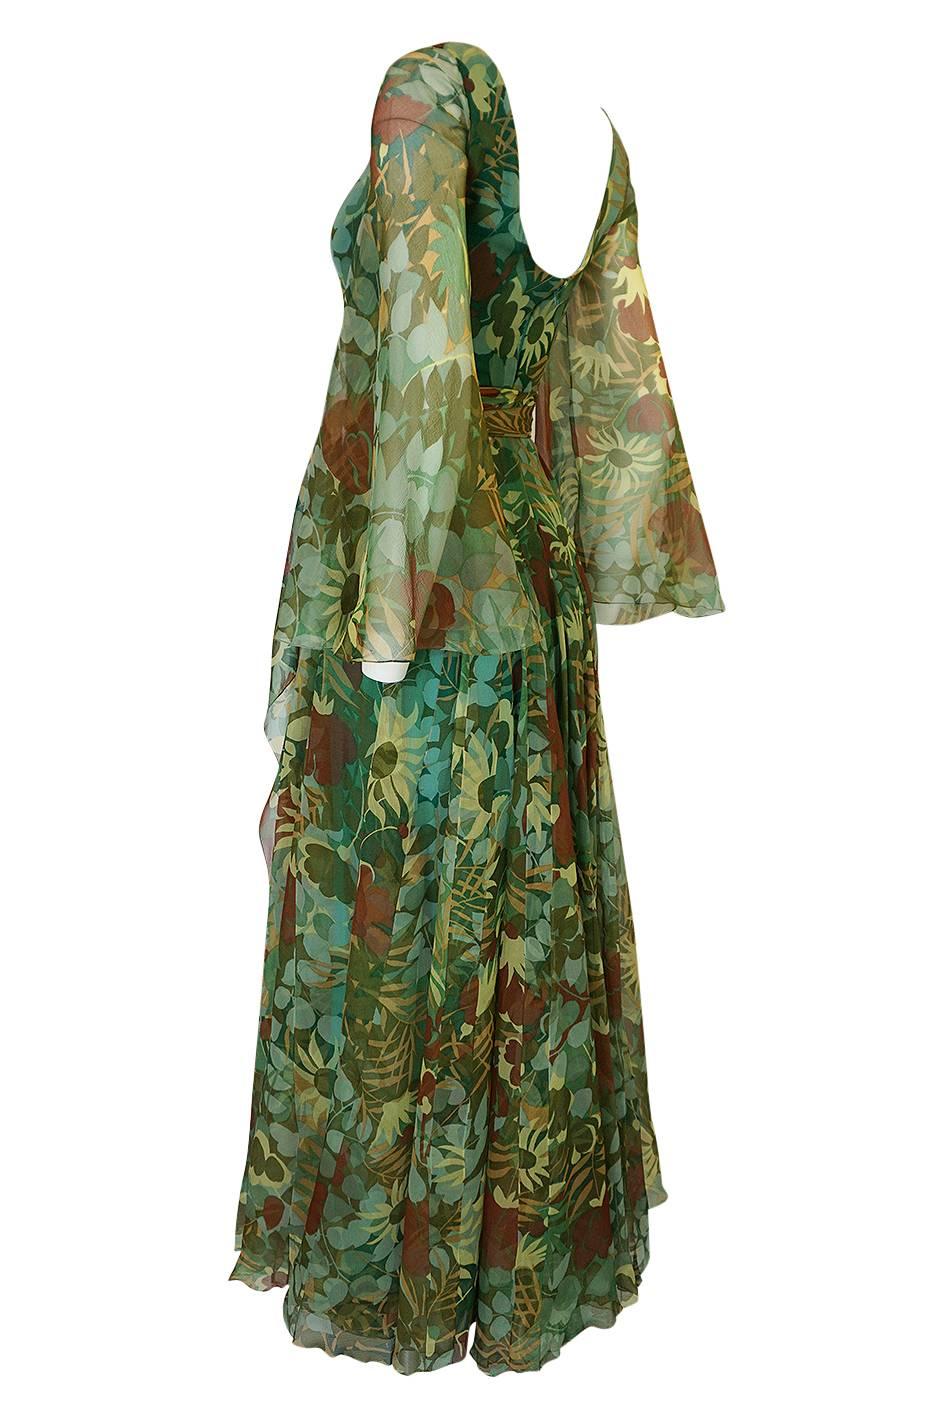 Women's 1970s Stavropoulos Couture Floral Print Silk Dress w Pleated Skirt